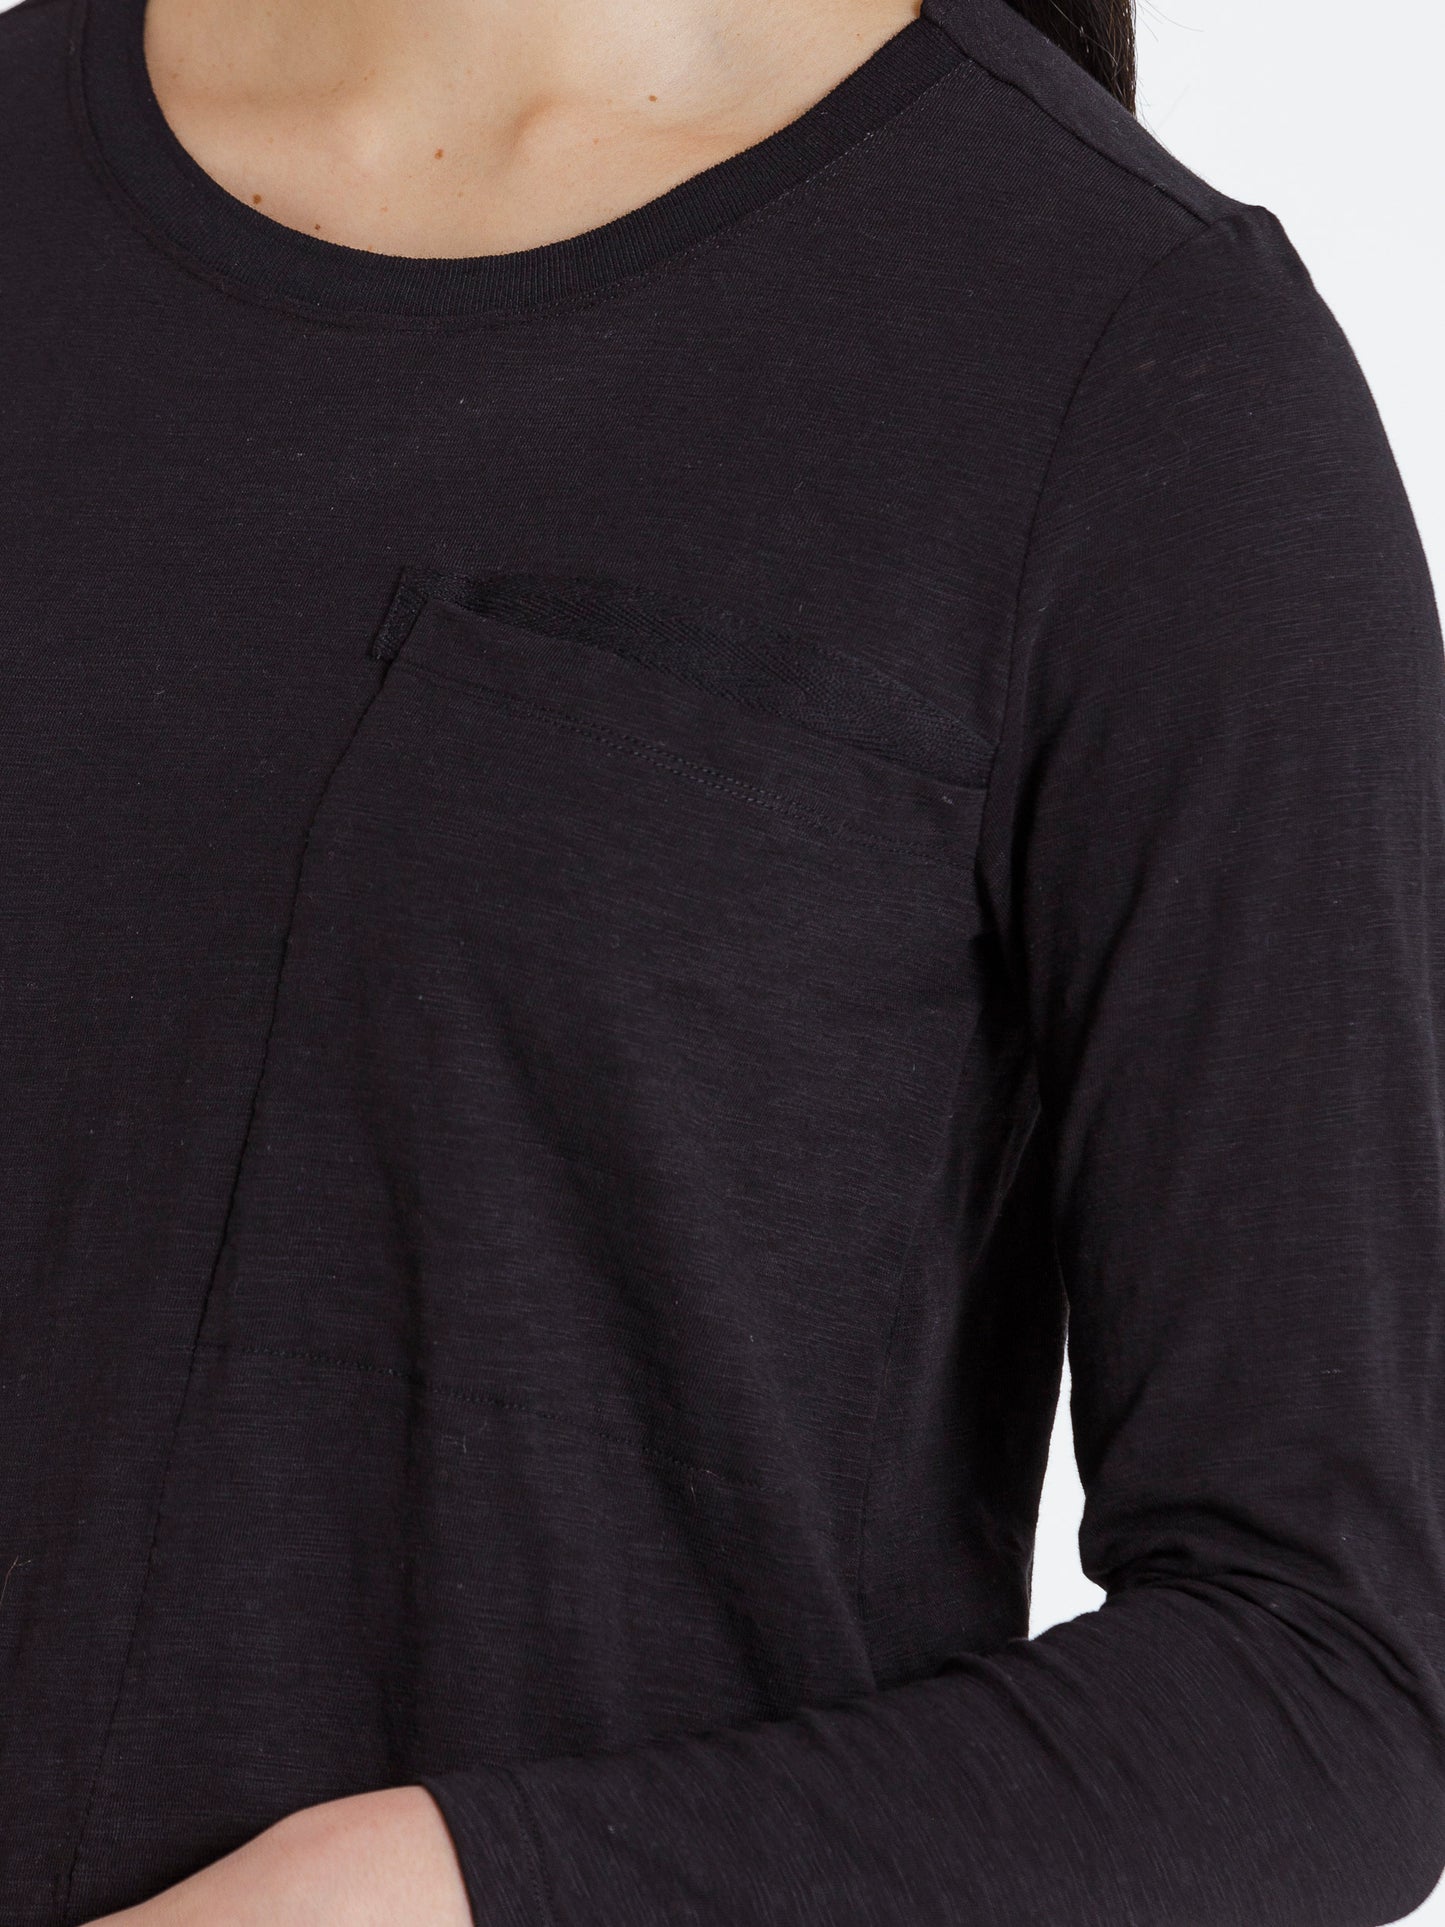 Marco Polo L/S Essential Tee Black | MP37378